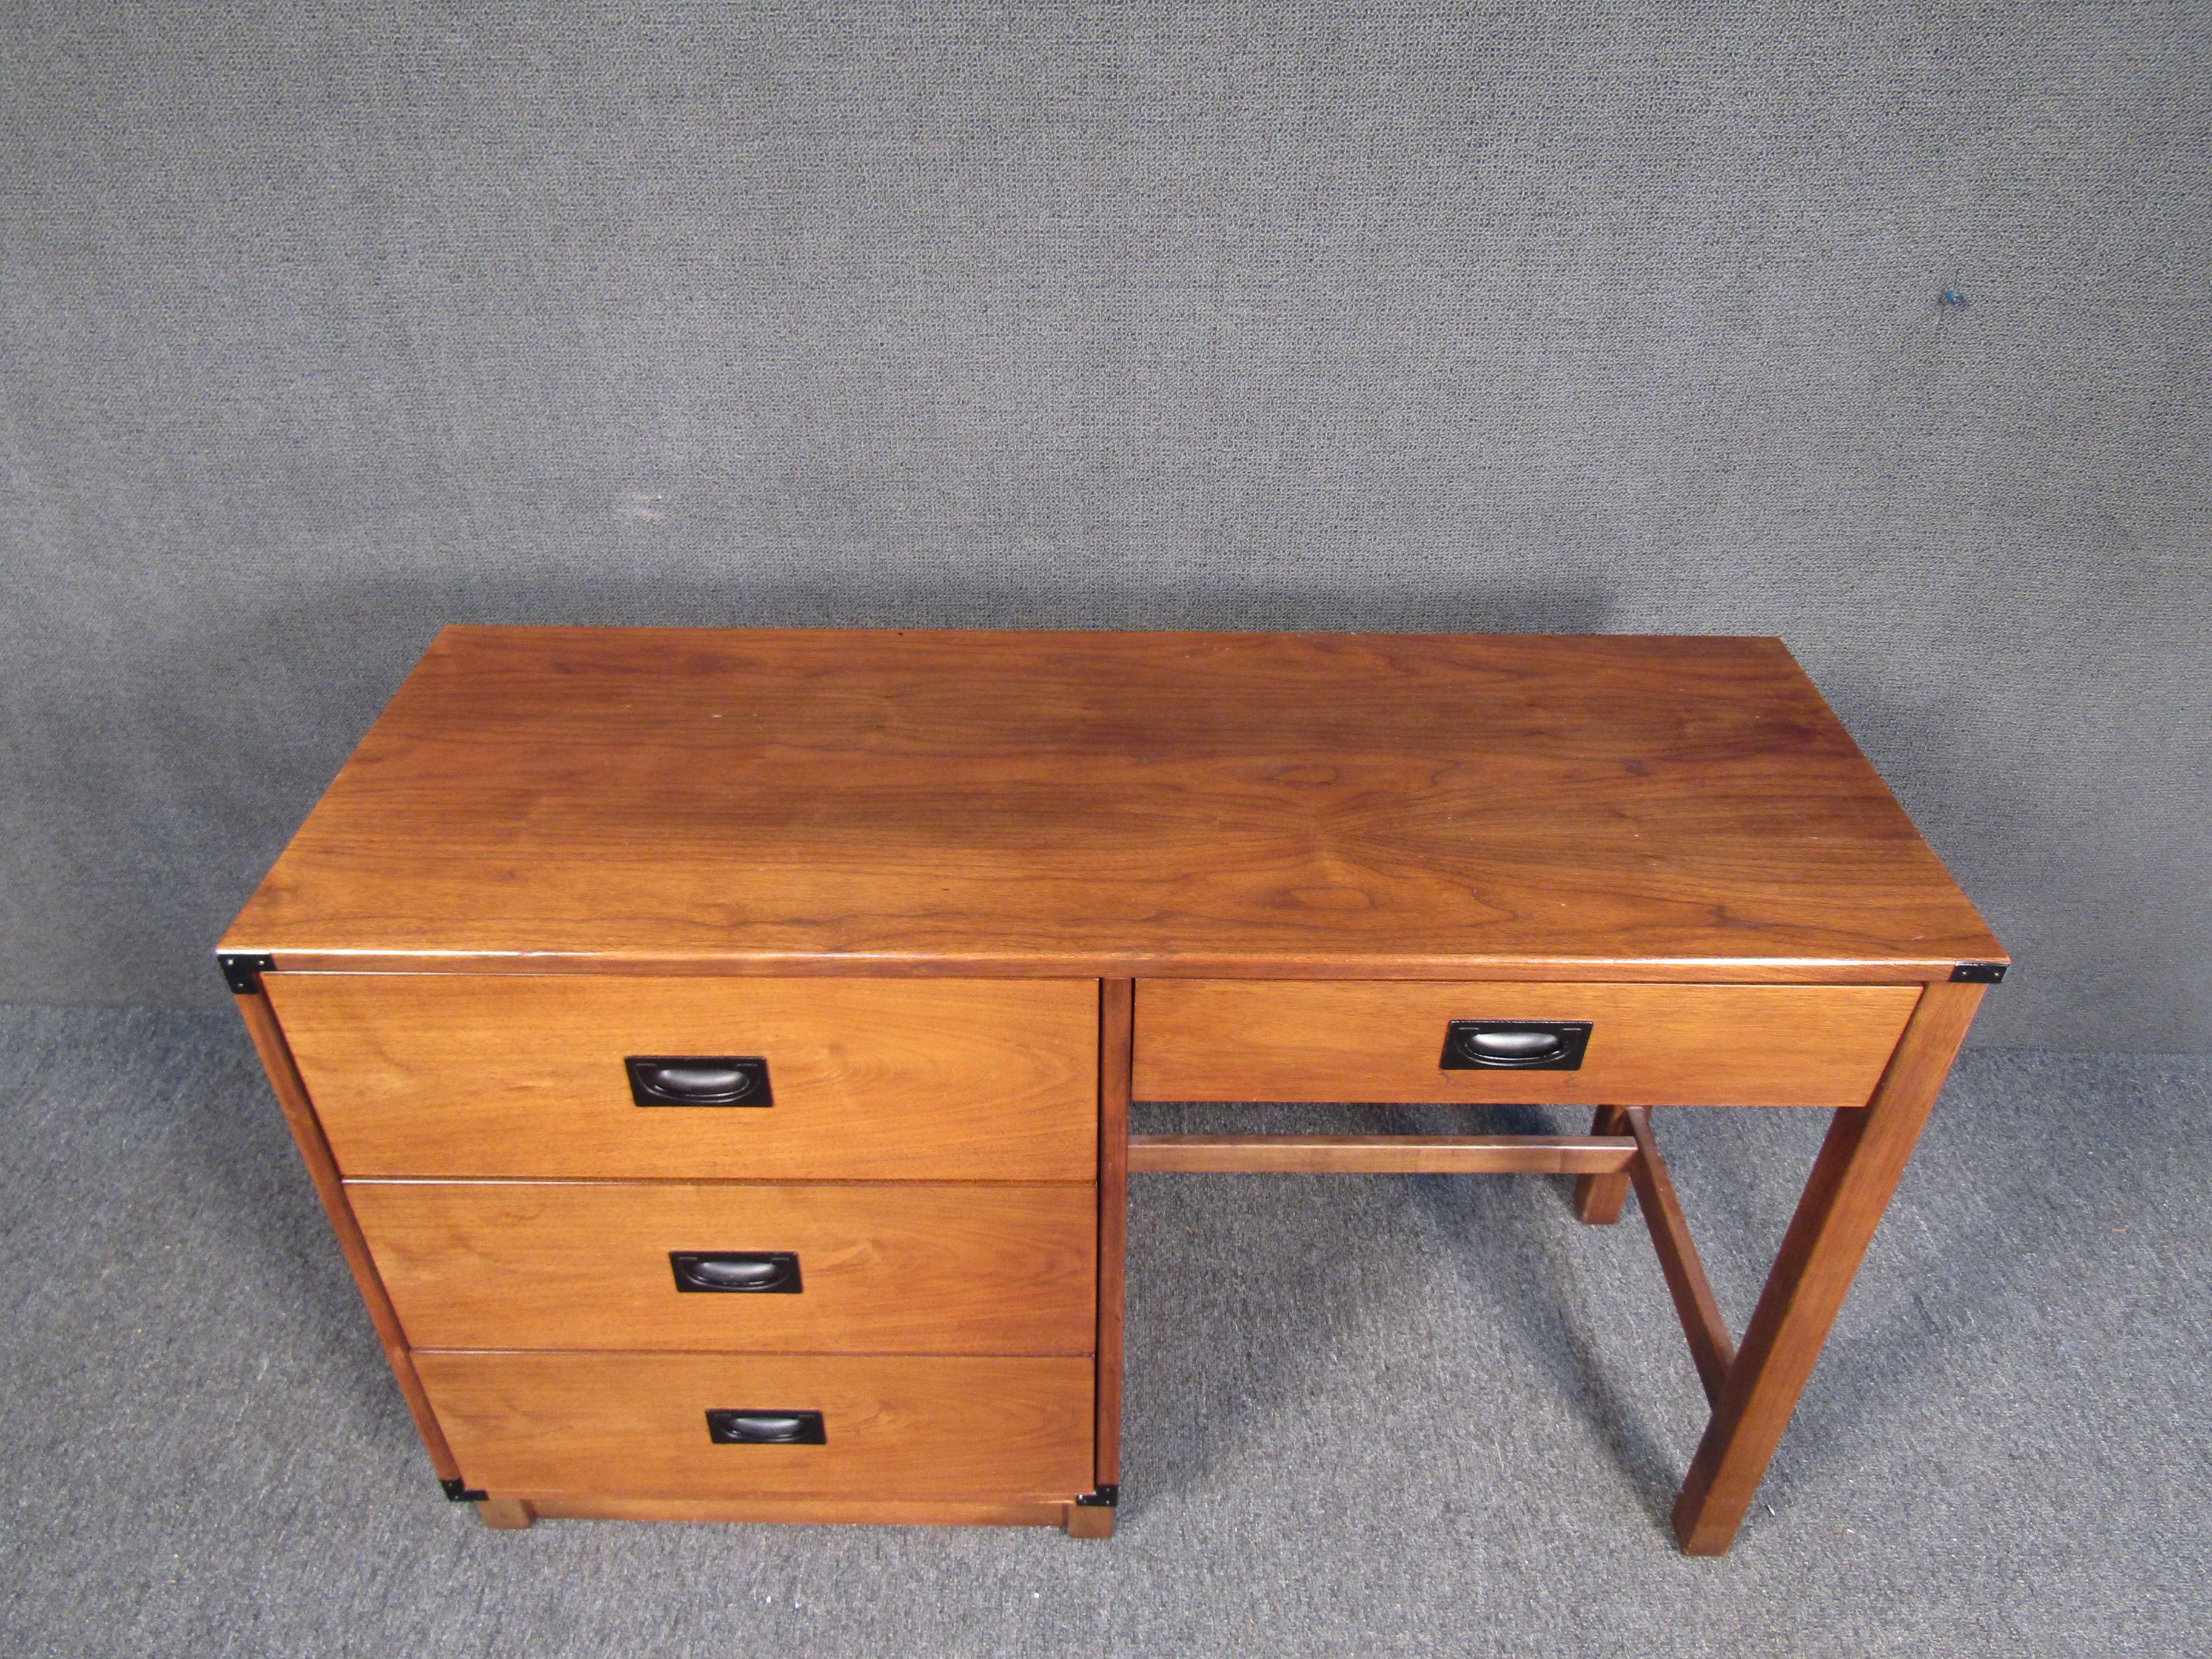 Beautiful walnut Drexel desk with matte black metal handles. Great piece for any office or bedroom. 

(Please confirm item location - NY or NJ - with dealer).
  